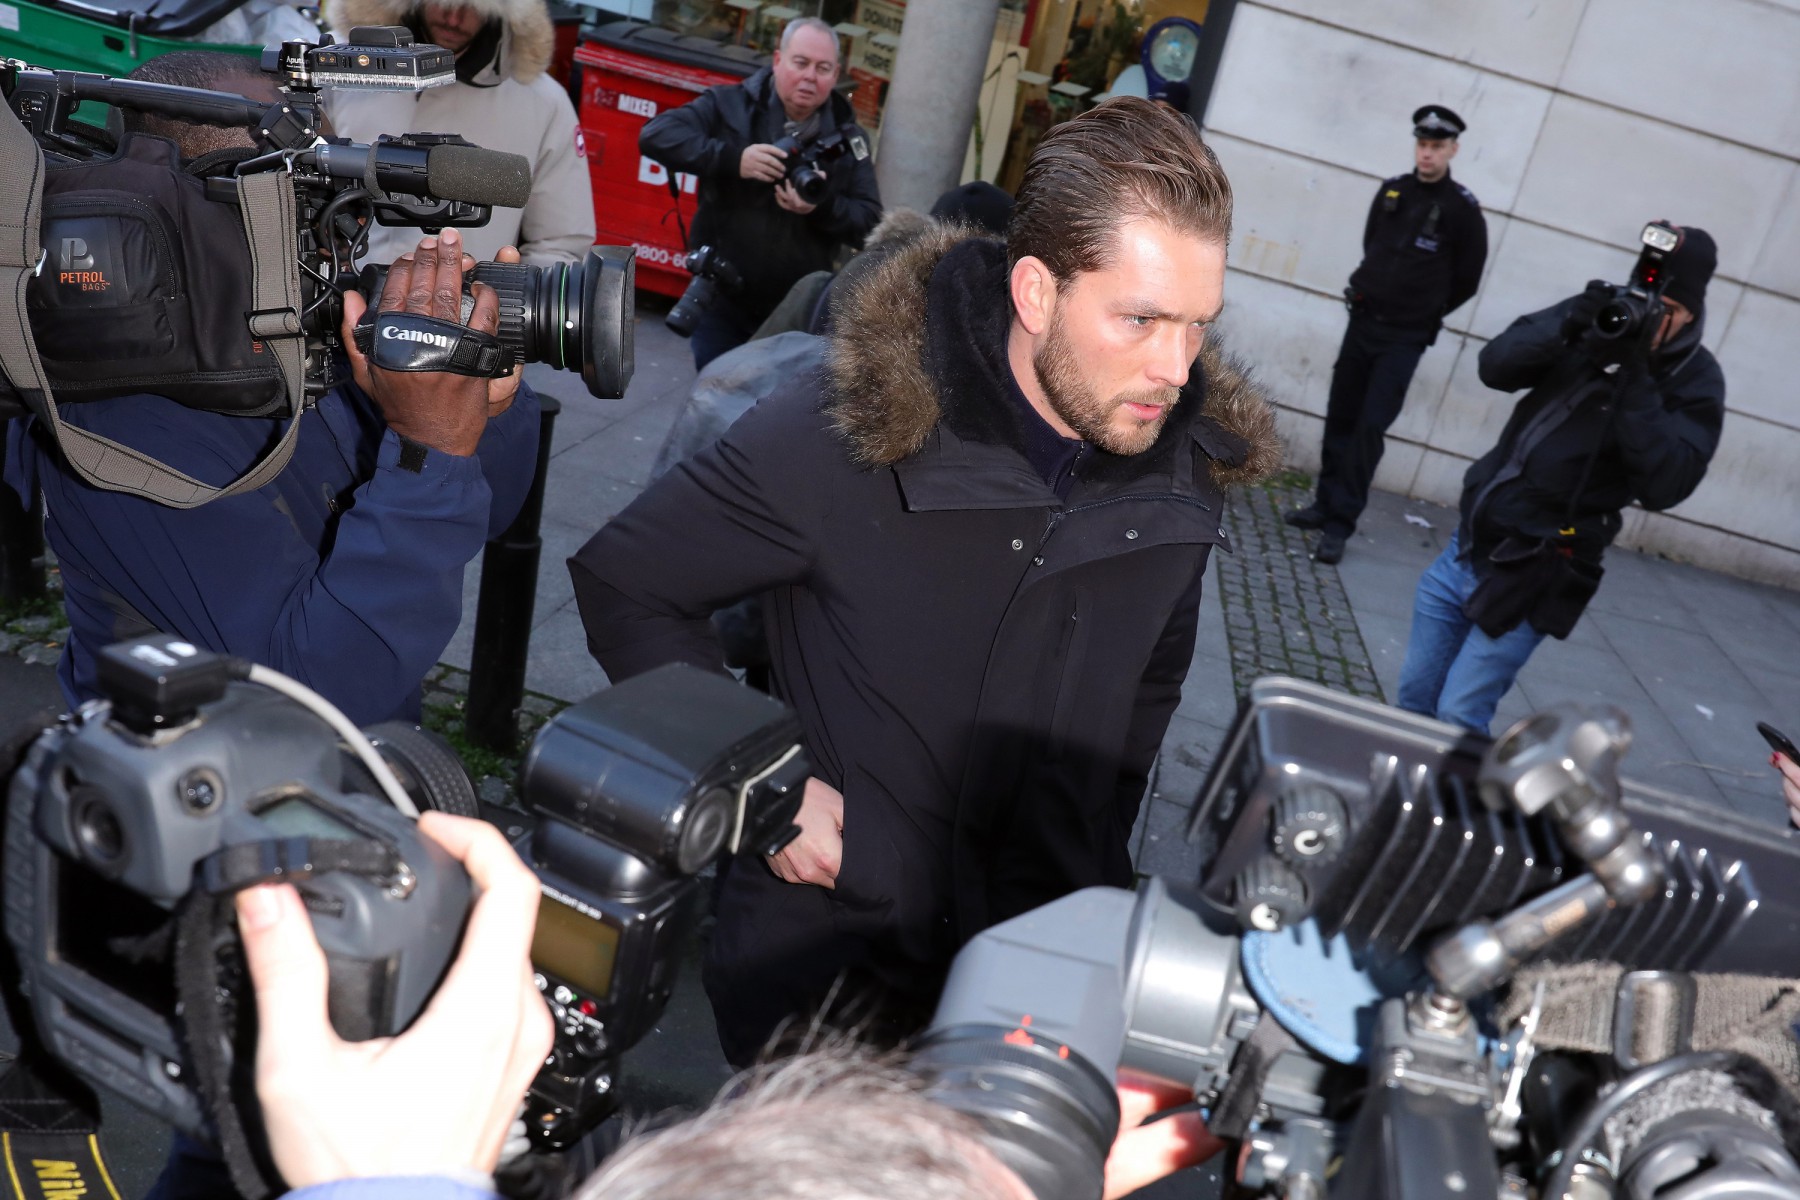 Lewis arrived separately to Ms Flack at court this morning